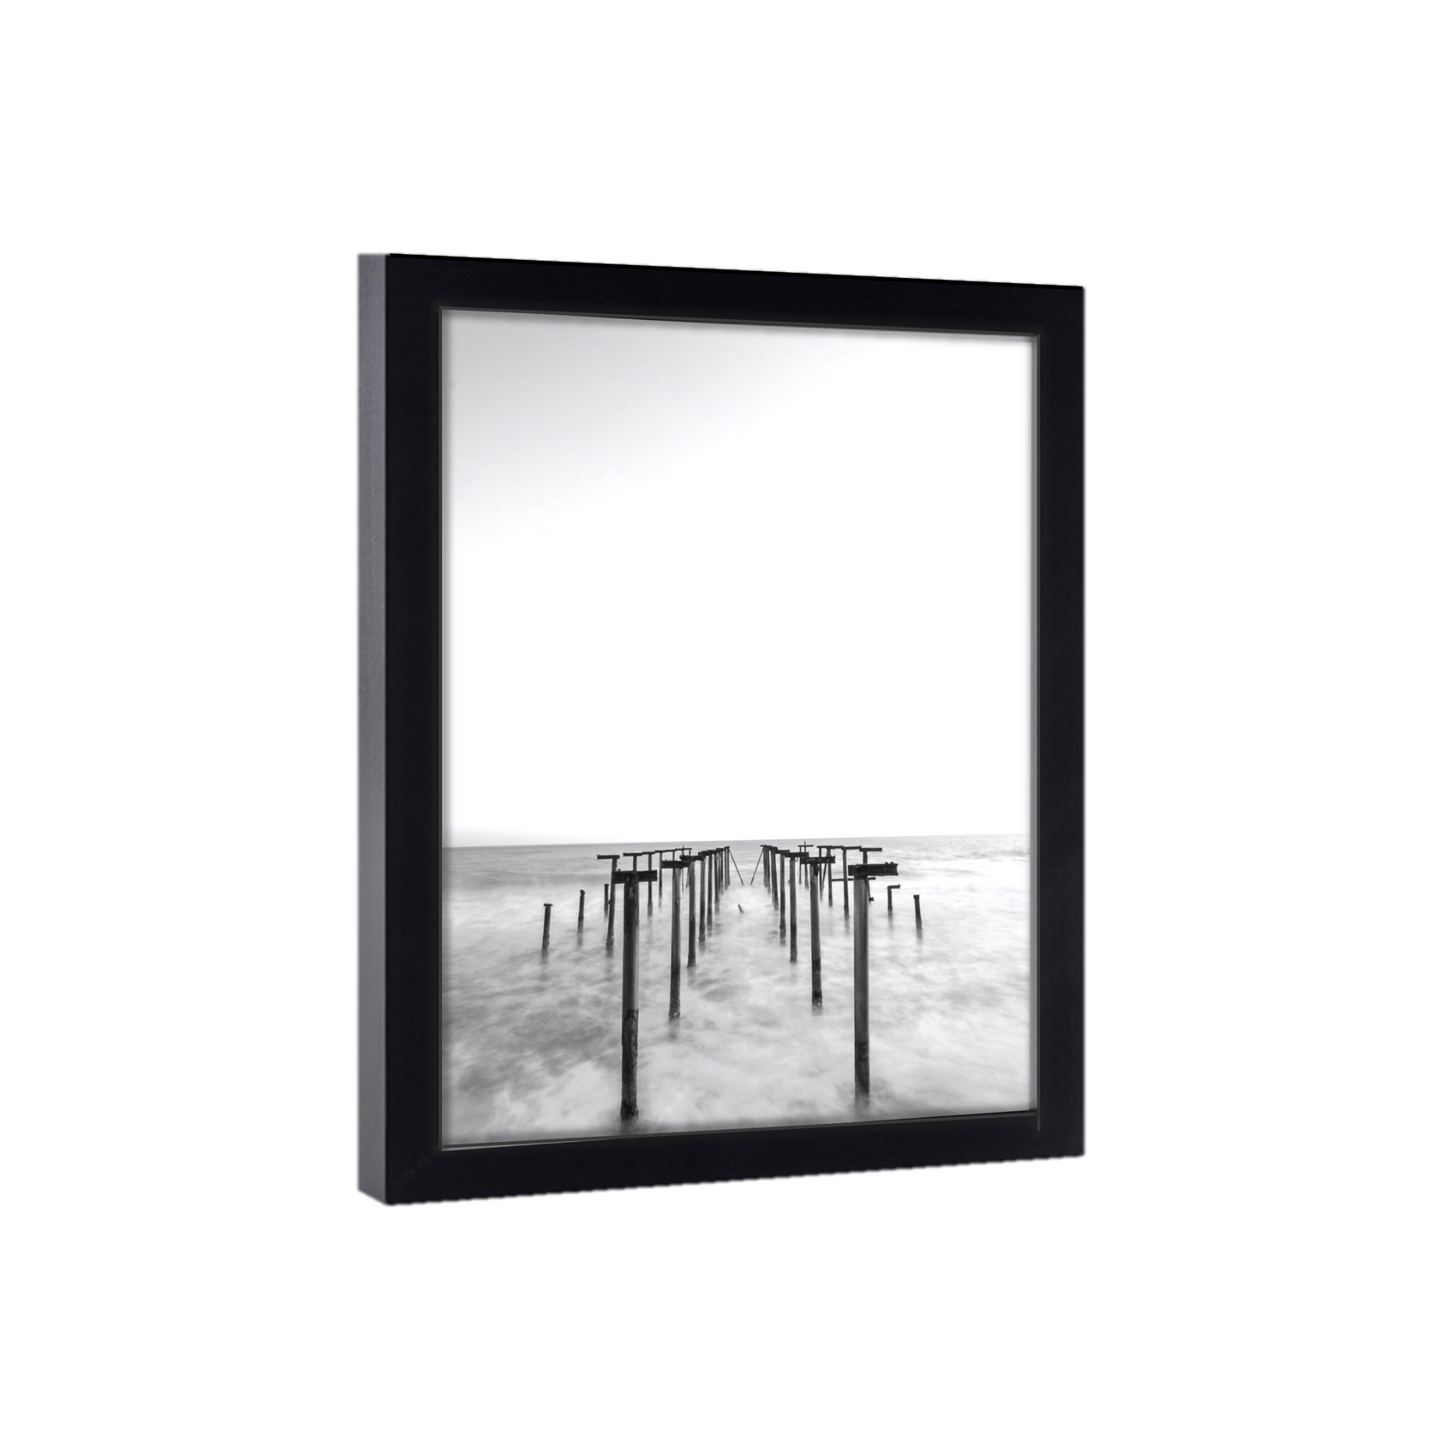 Gallery Wall 11x26 Picture Frame Black Wood 11x26  Poster Size